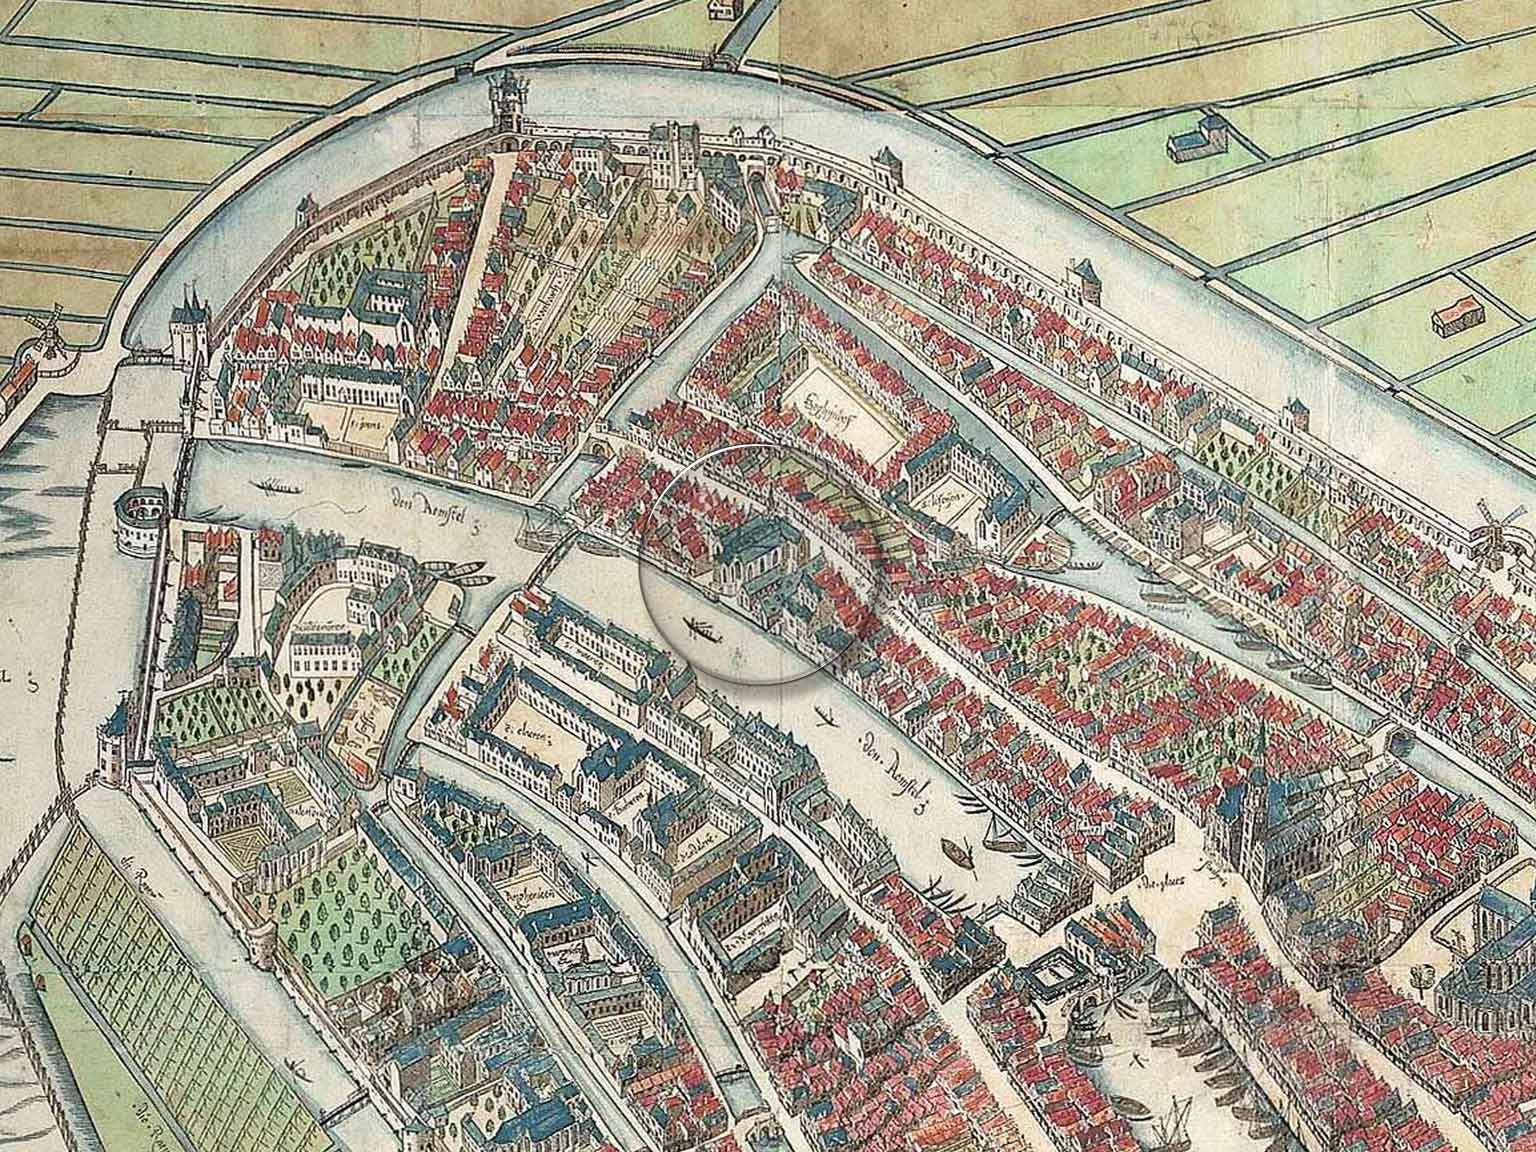 Holy Stead Chapel, Amsterdam, in 1544, detail of a map by Cornelis Anthonisz